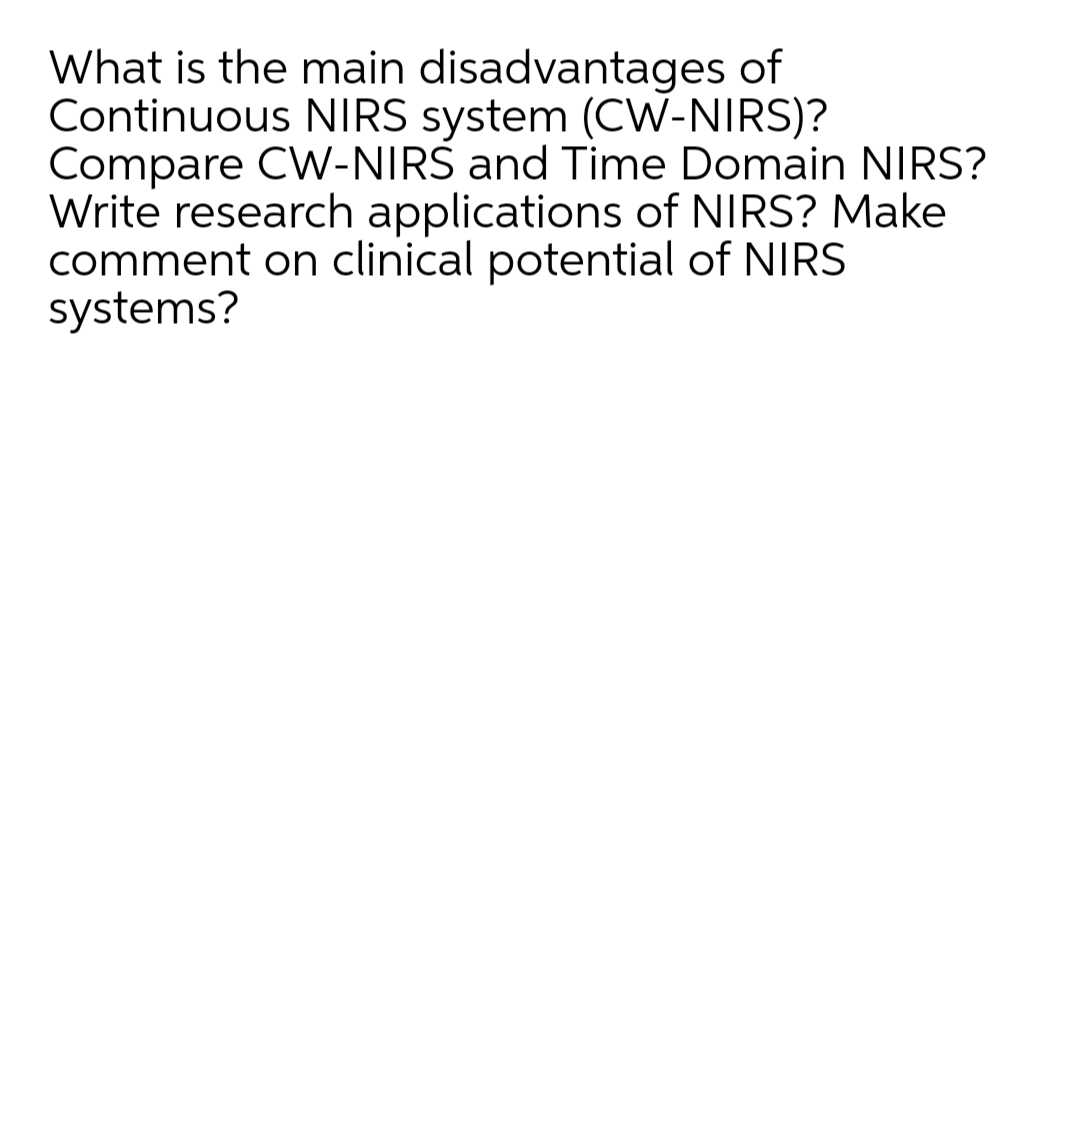 What is the main disadvantages of
Continuous NIRS system (CW-NIRS)?
Compare CW-NIRS and Time Domain NIRS?
Write research applications of NIRS? Make
comment on clinical potential of NIRS
systems?
